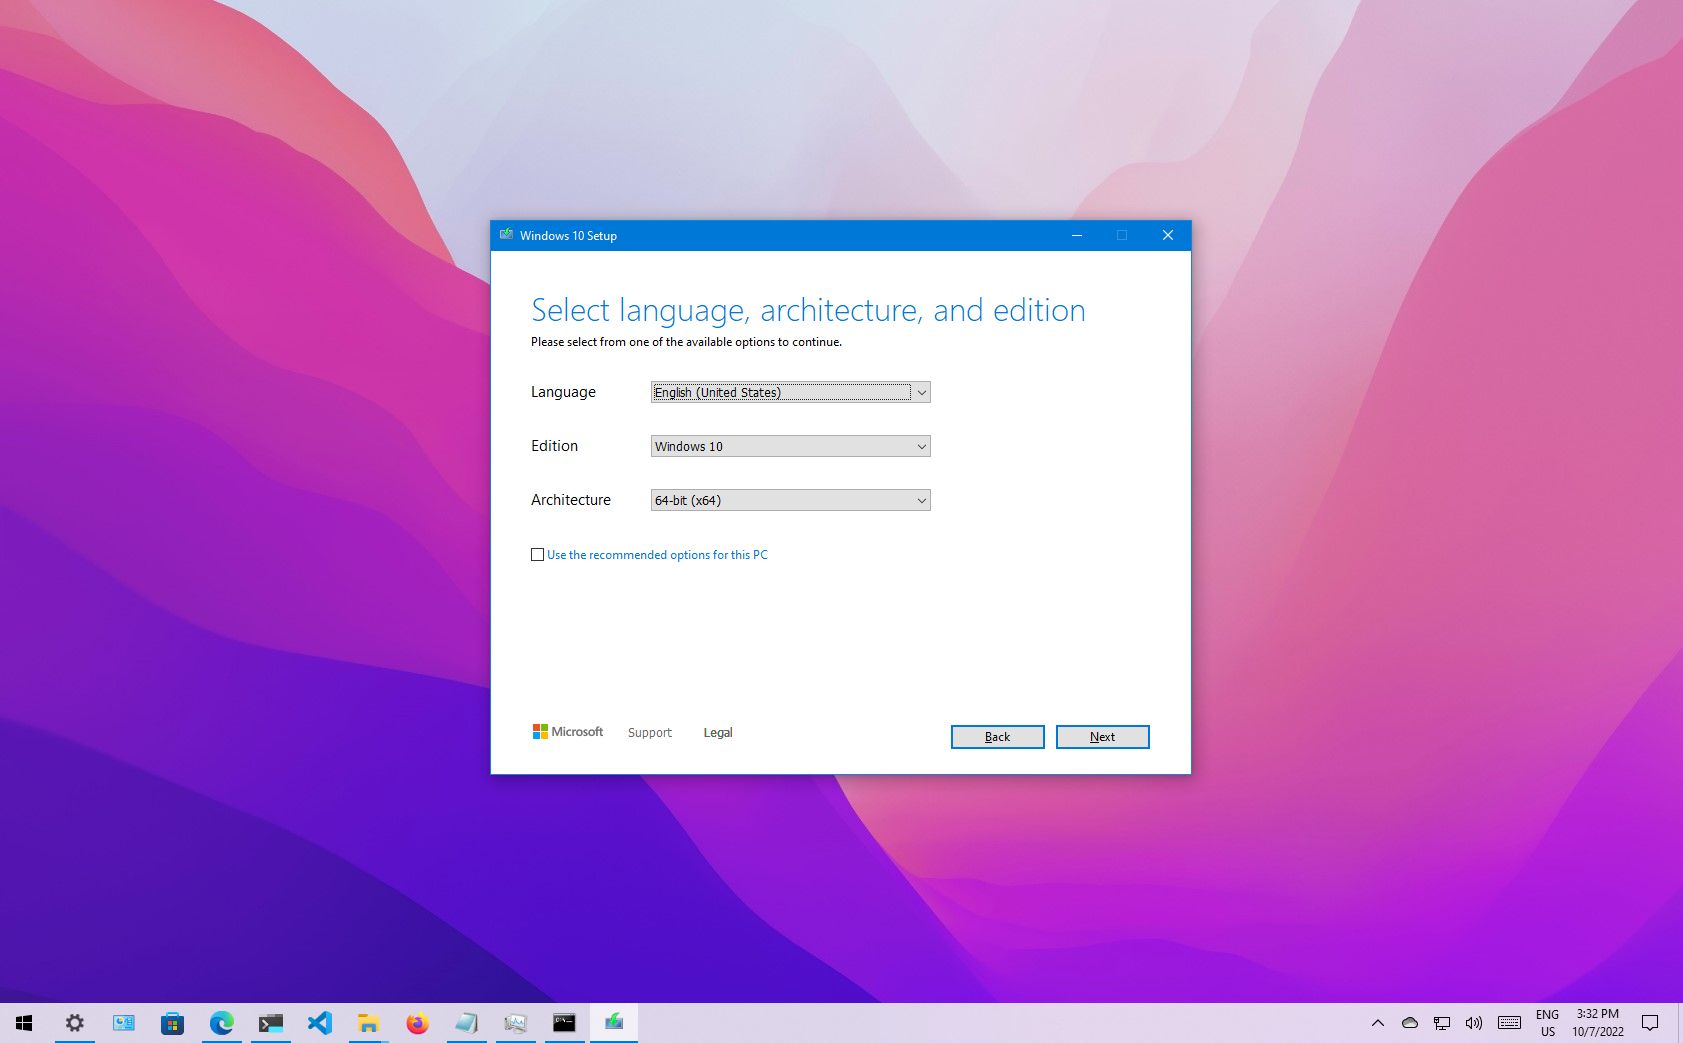 How to upgrade from 32-bit to 64-bit version of Windows 10